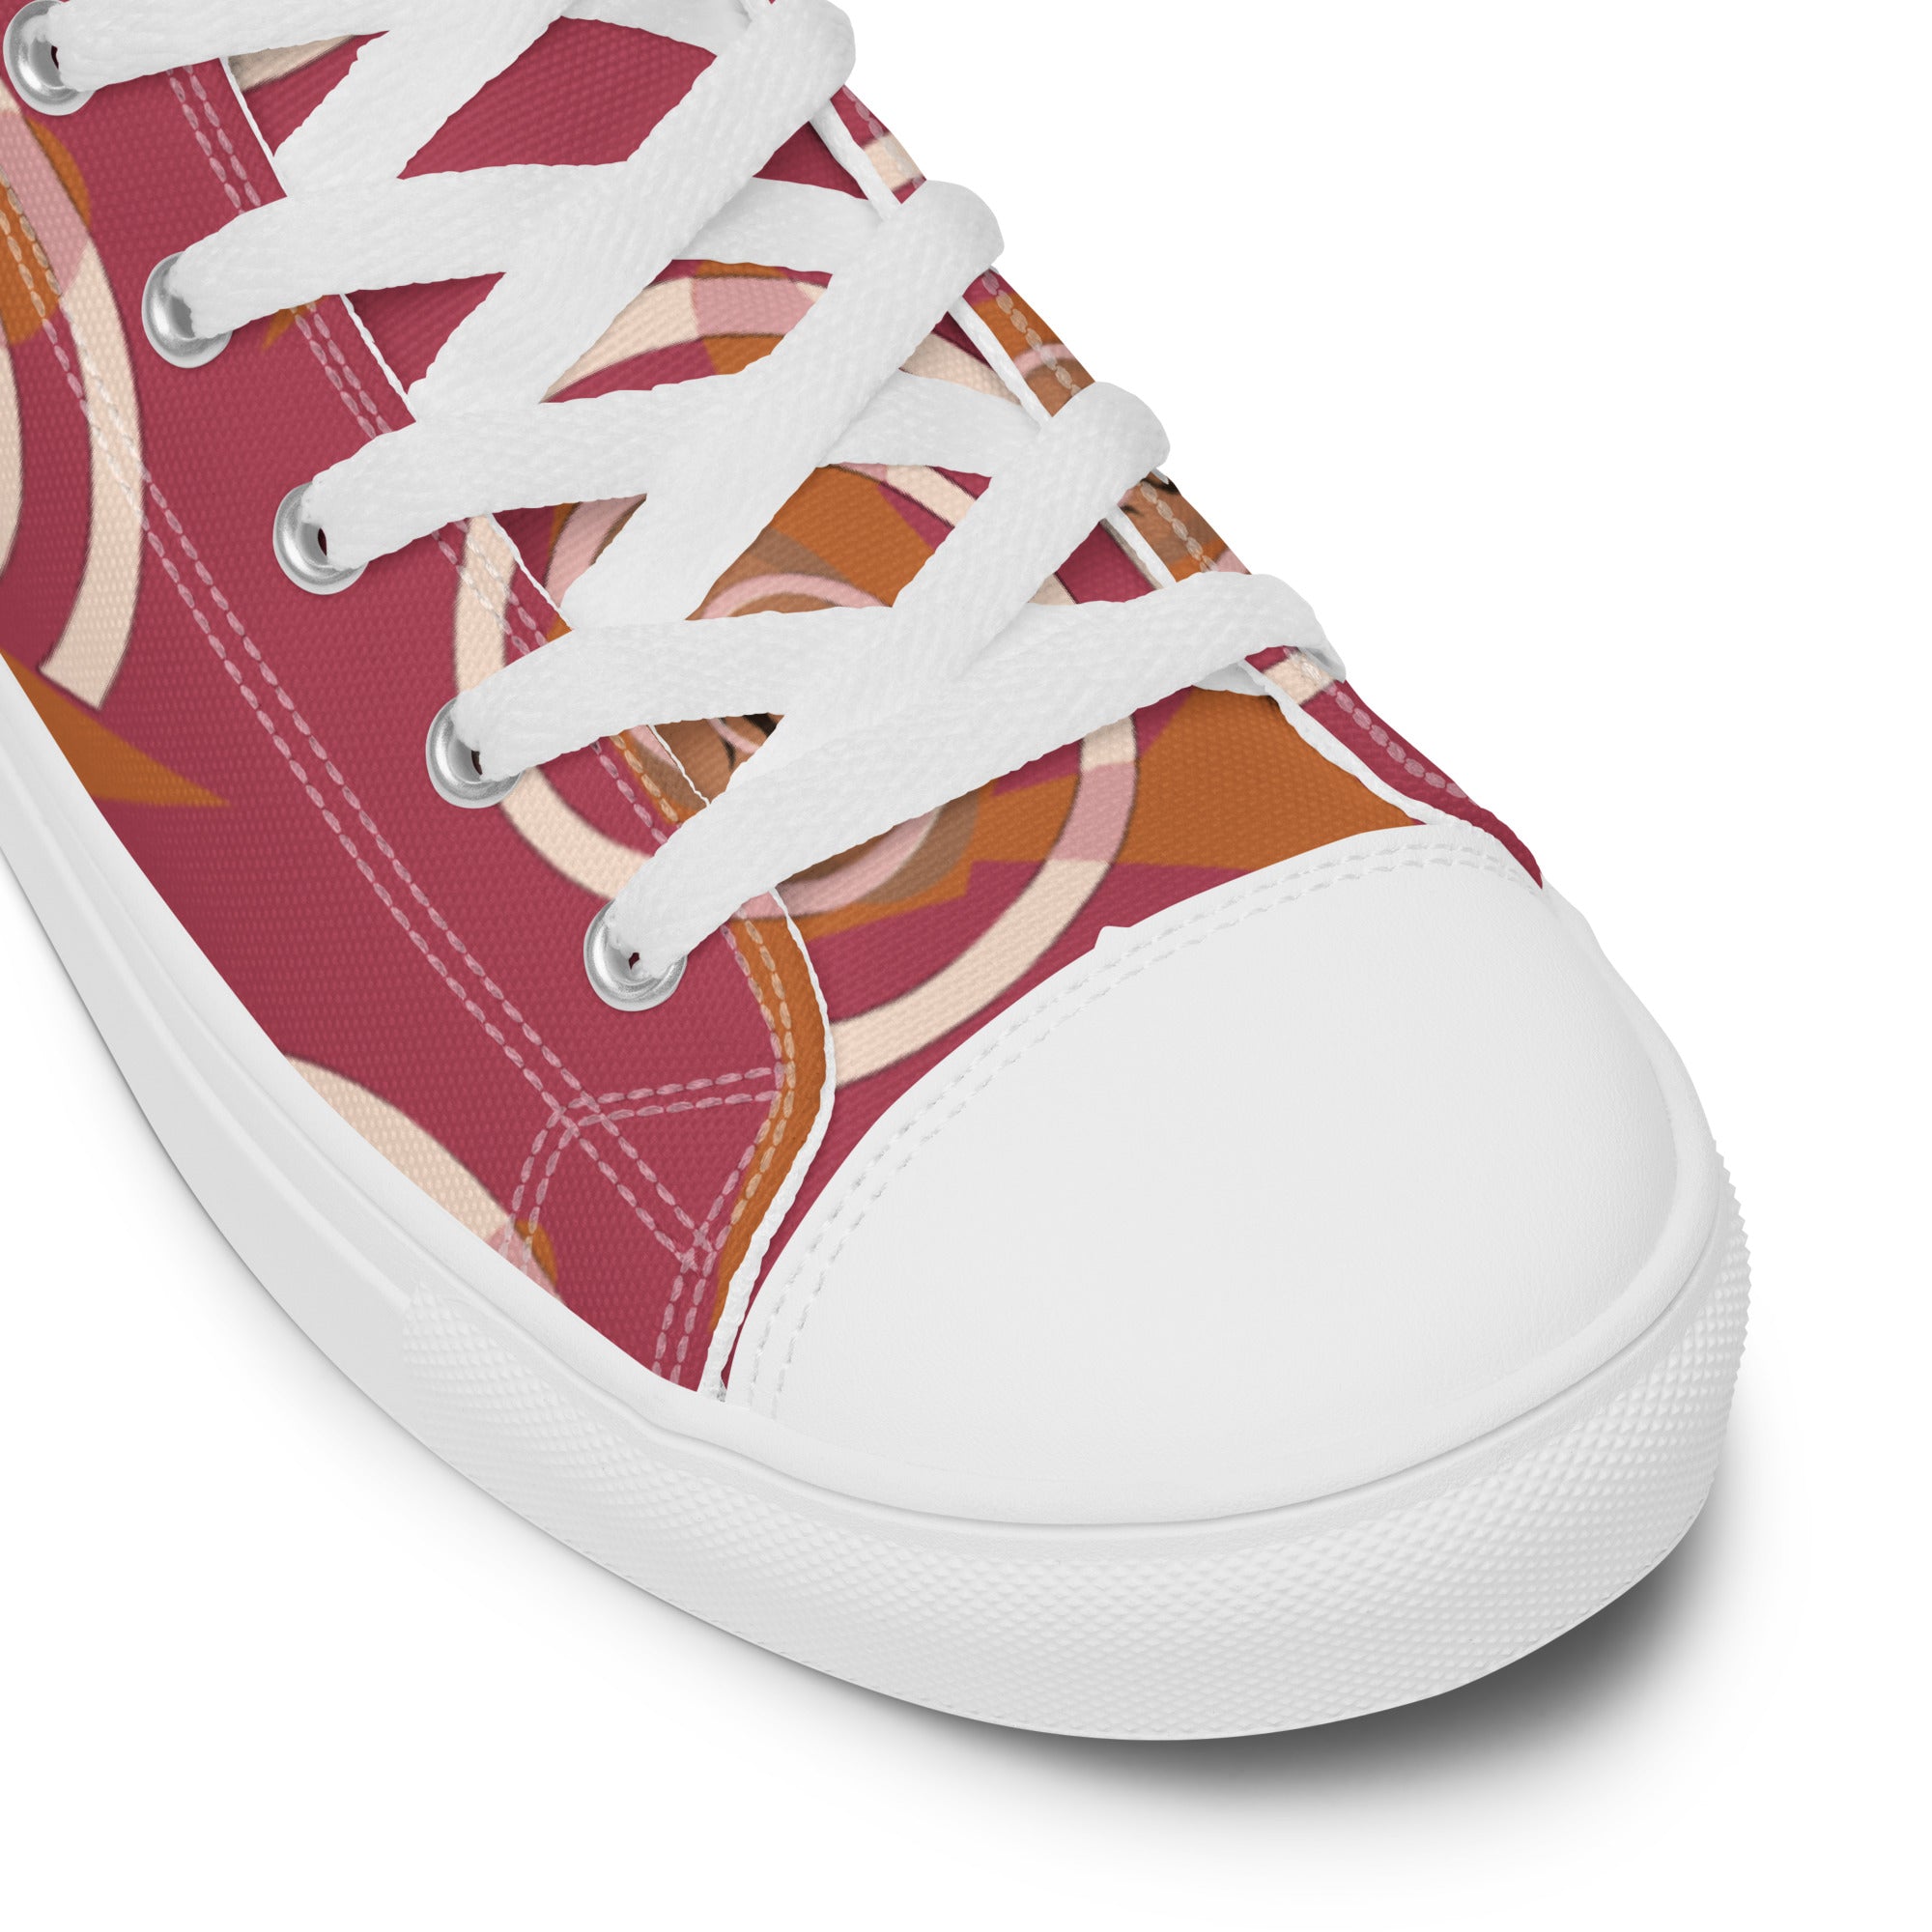 AJBeneficial Women’s Pink high top canvas shoes